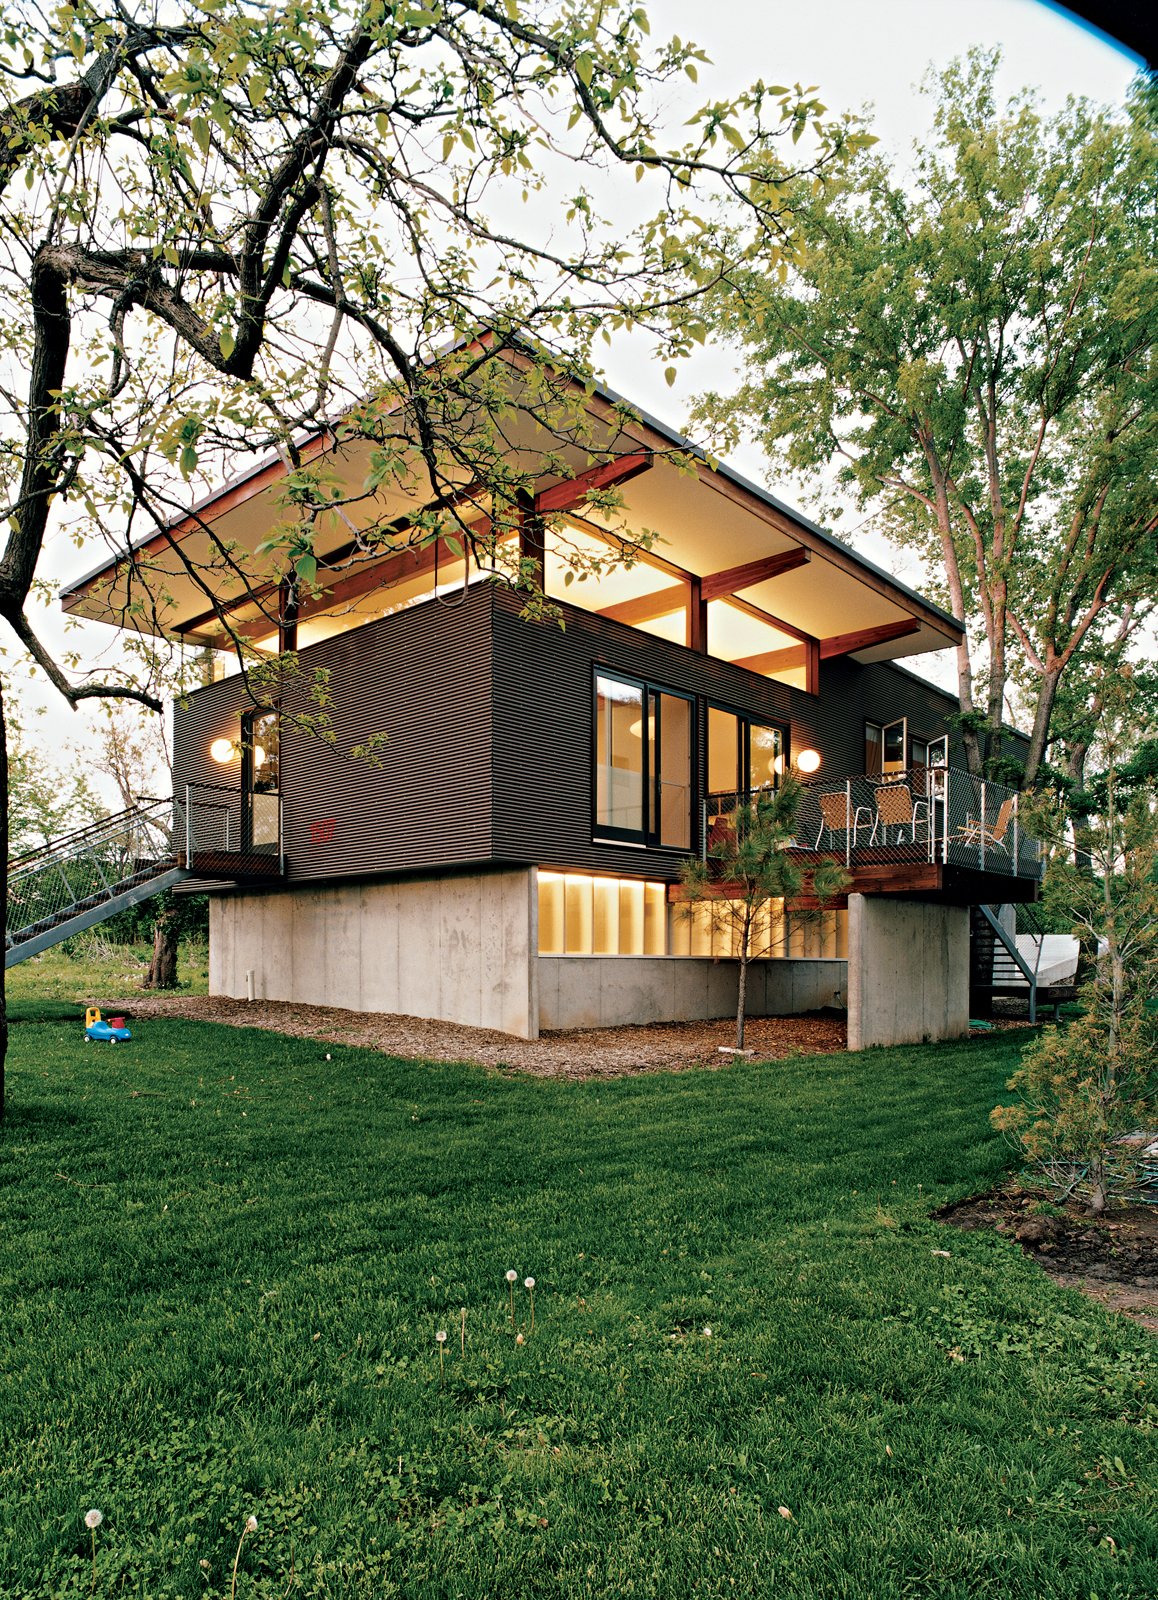 In Kansas City, Missouri, a family sought to construct a new home using prefabricated structural insulated panels (SIPS) instead of traditional frame construction. The entire kit house is composed of 4' x 8' sections, and the shell was constructed in about a week. The project’s relatively low cost, quick build time, and highly insulated envelope were positives, but the panels also have their limitations. 